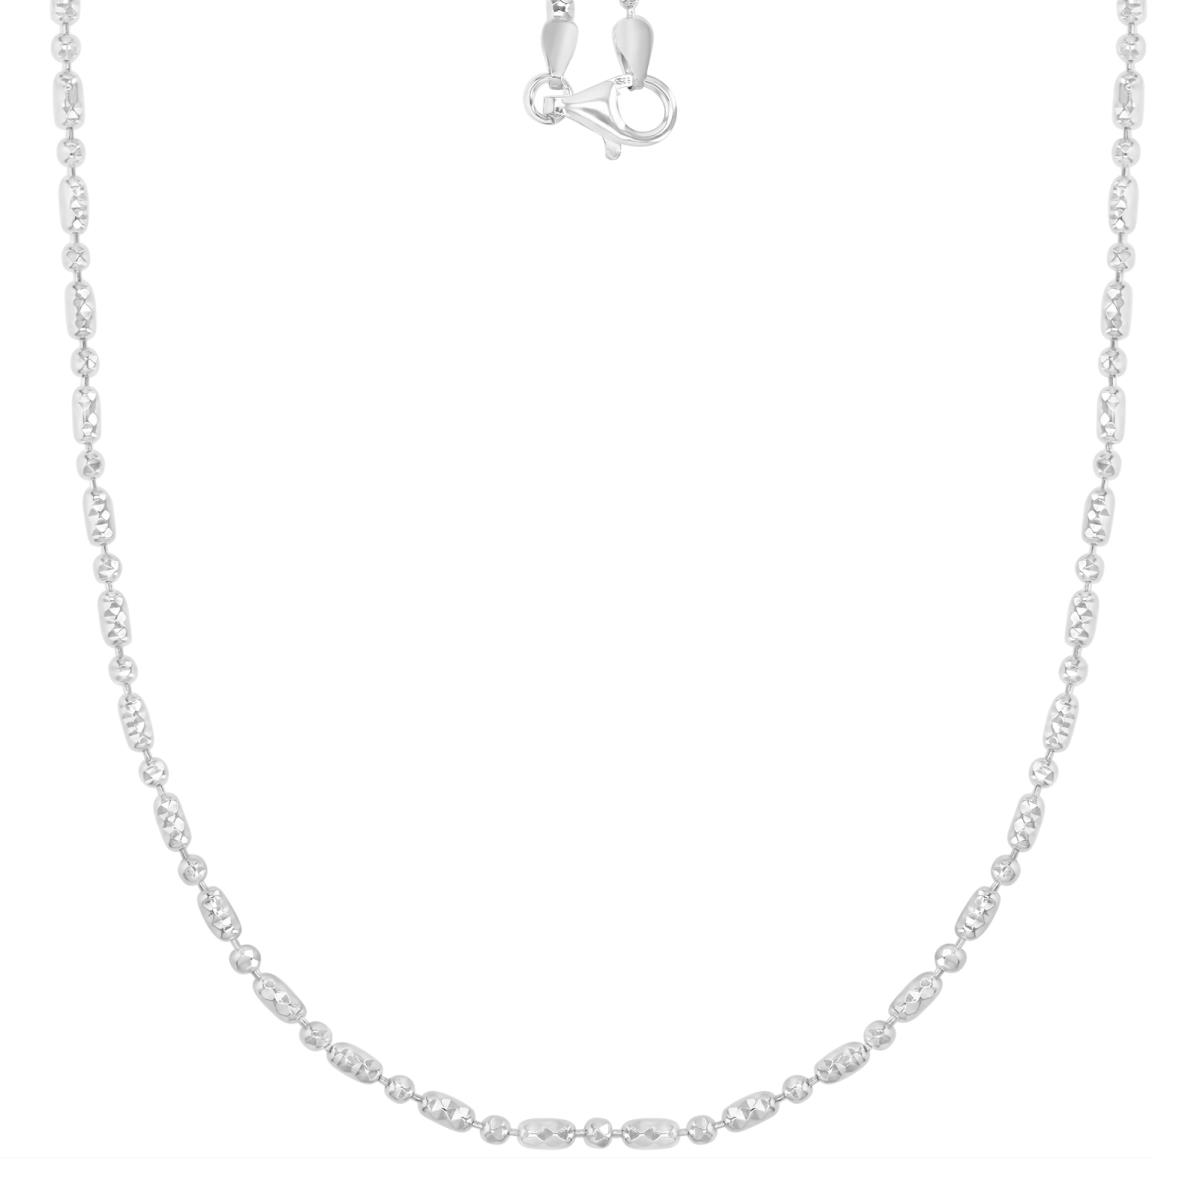 Sterling Silver Anti-Tarnish 2.3MM Polished & Diamond Cut 220 Bead Station Link 20" Chain Necklace